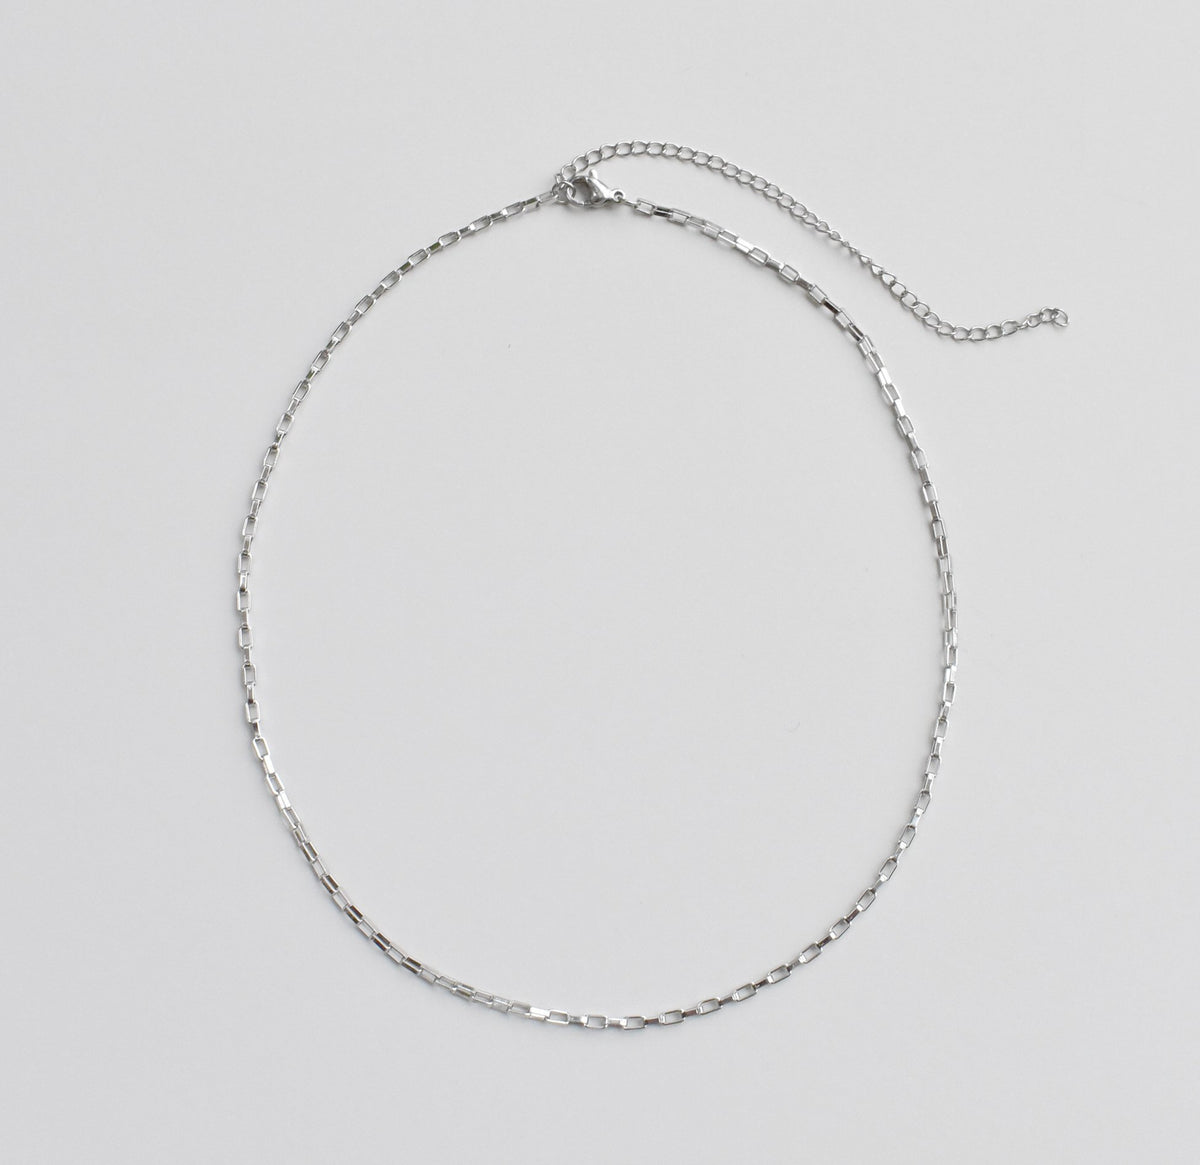 silver box chain necklace adjustable waterproof silver jewelry